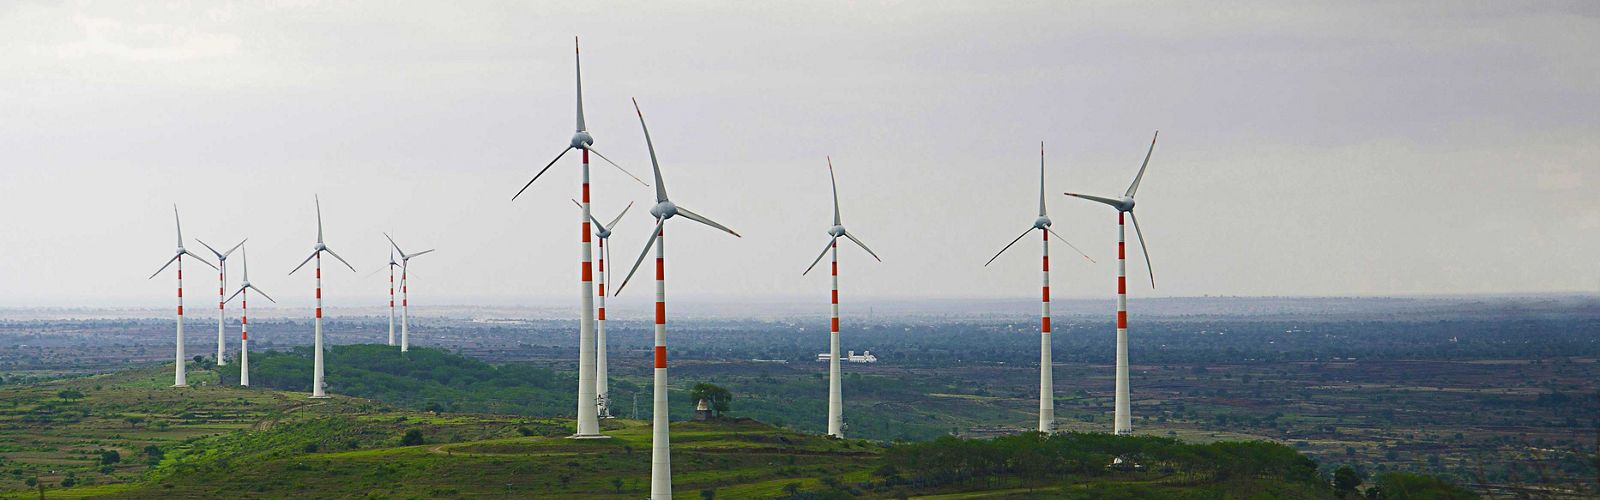 Several white wind turbines with red stripes stand in a vast green landscape in India.